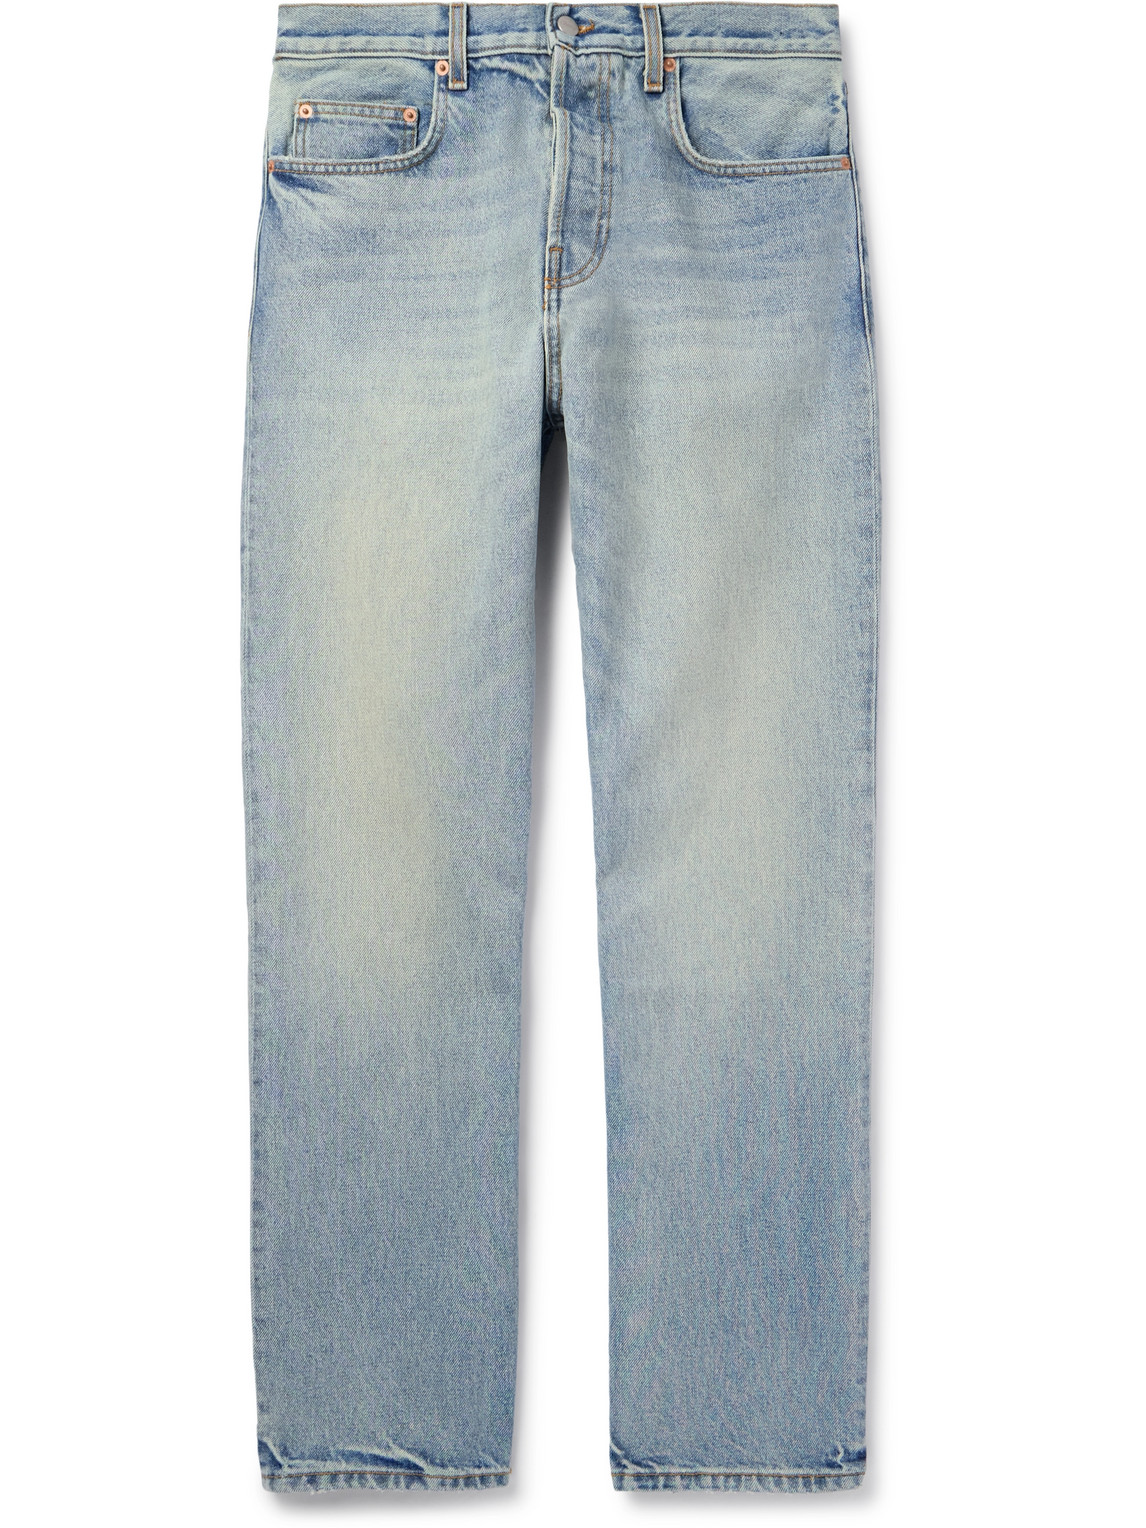 Cherry Los Angeles Straight-leg Jeans In Blue